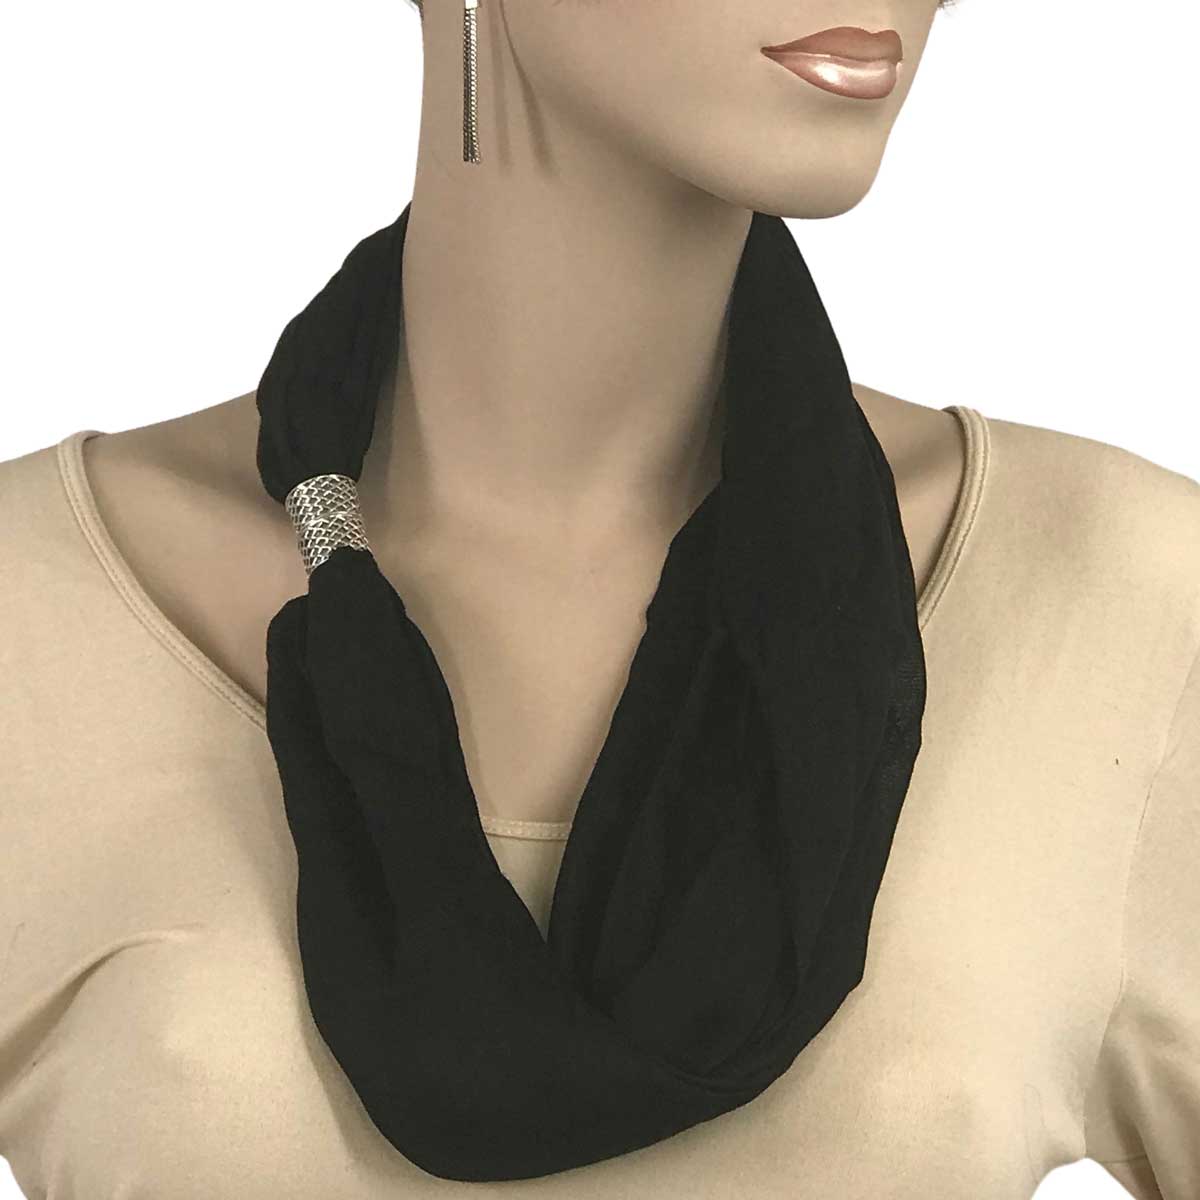 3171 - Magnetic Clasp Scarves (Cotton/Silk) 100 